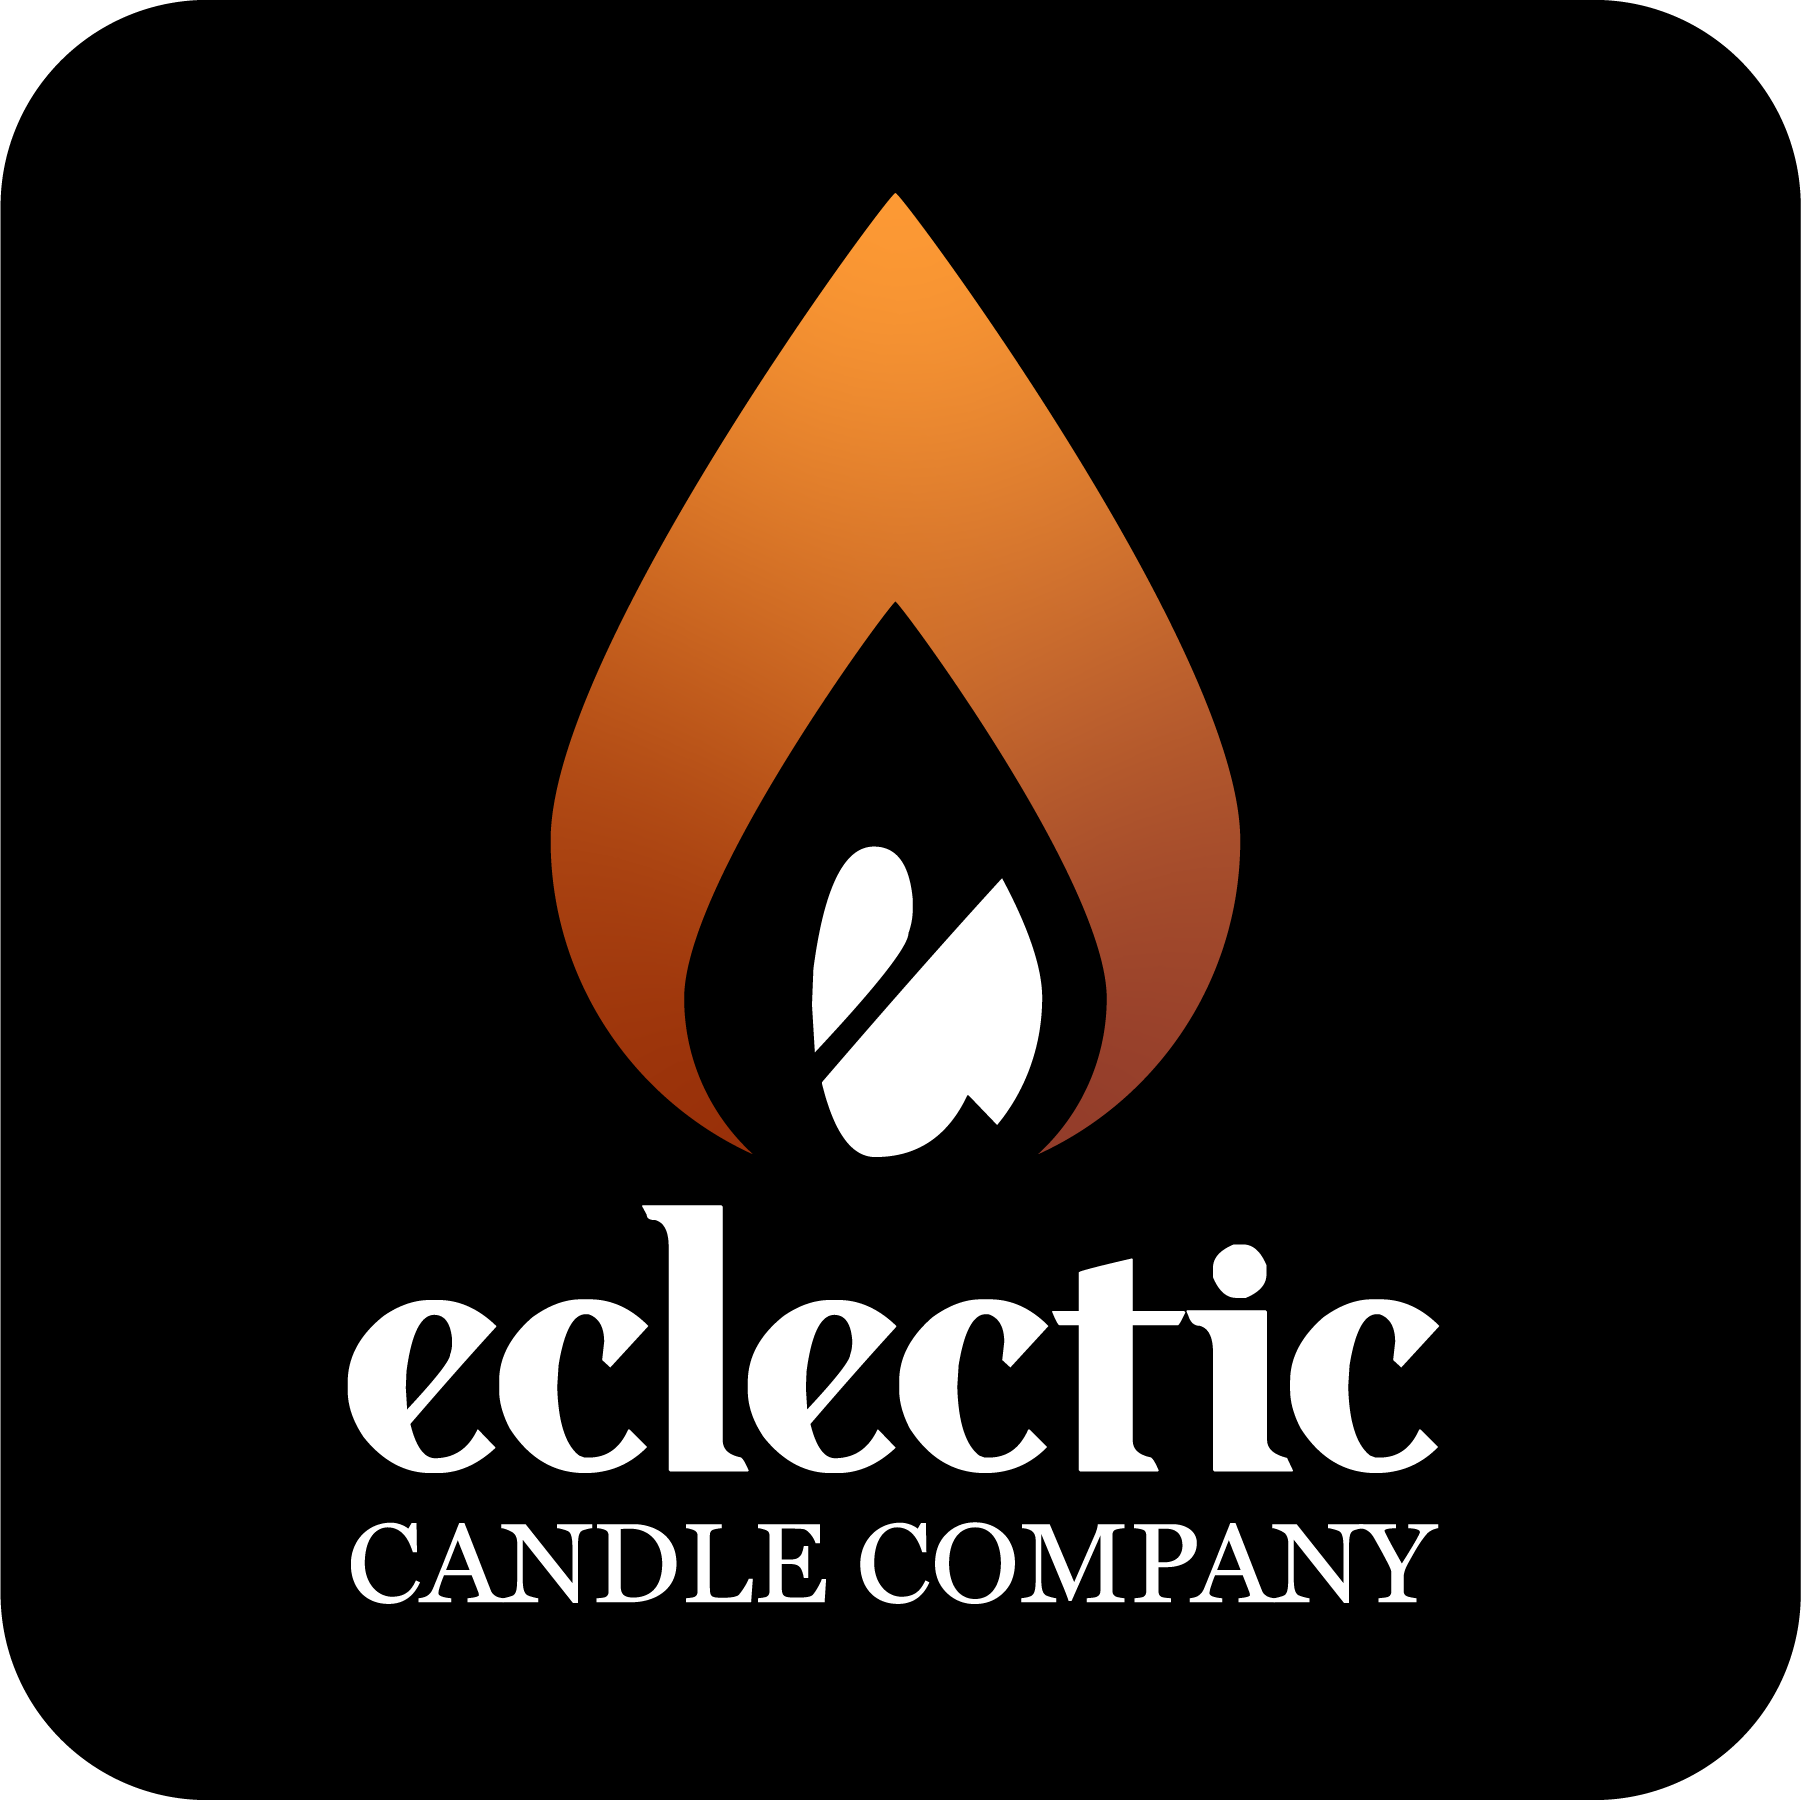 Eclectic Candle Company